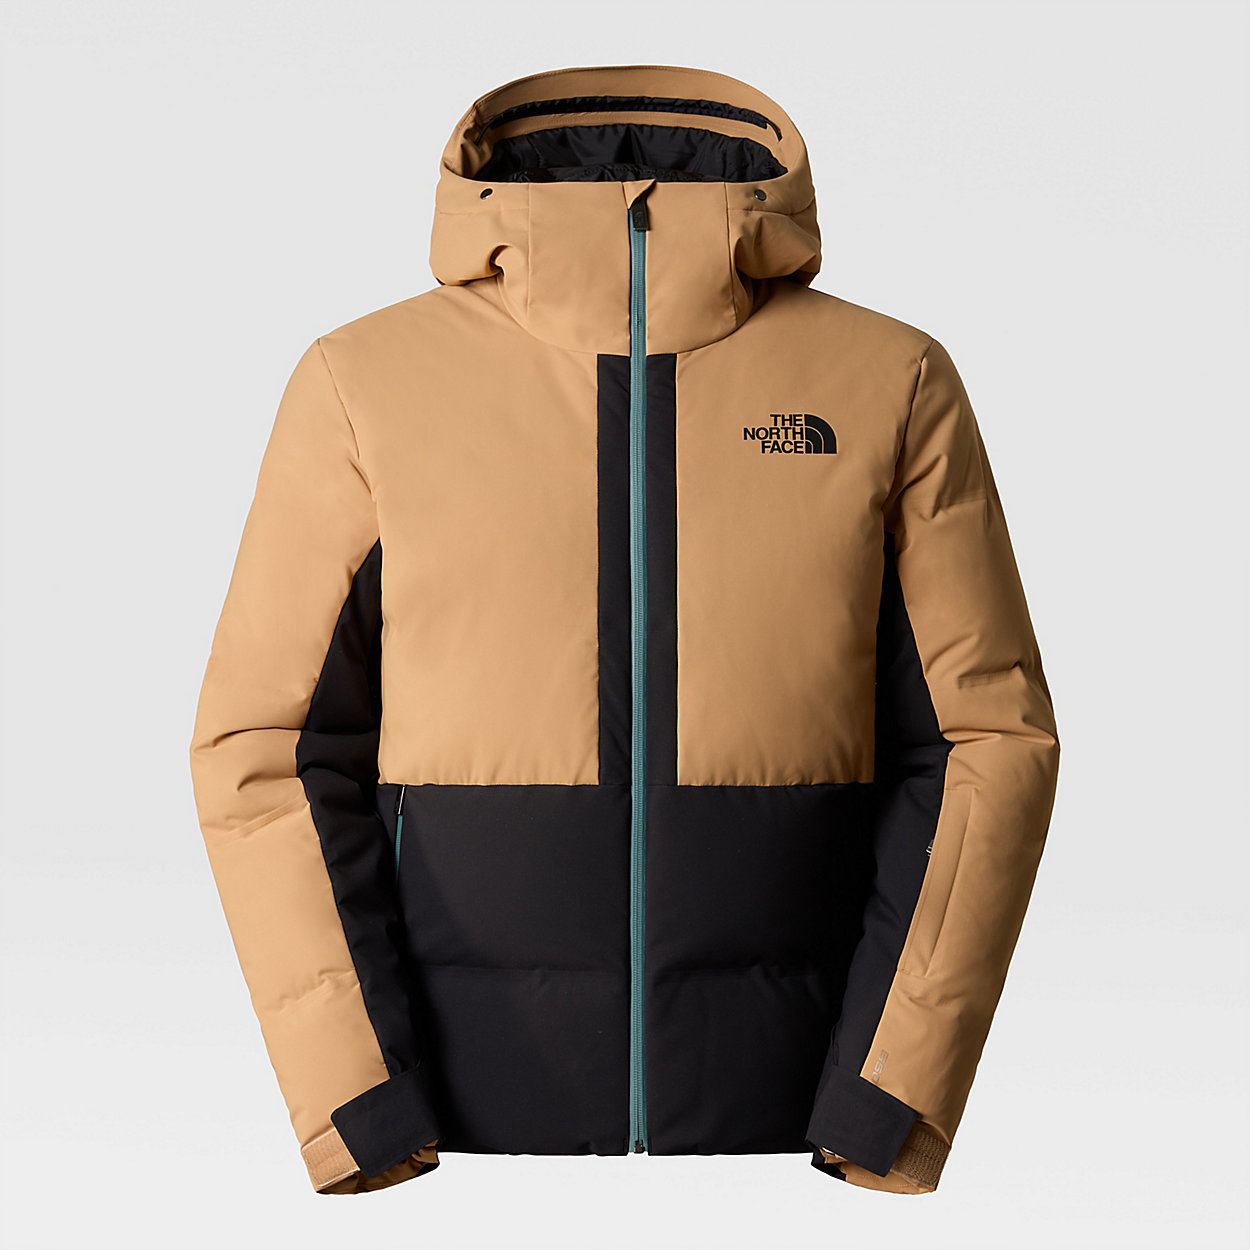 Unlock Wilderness' choice in the Peak Performance Vs North Face comparison, the Cirque Down Jacket by The North Face